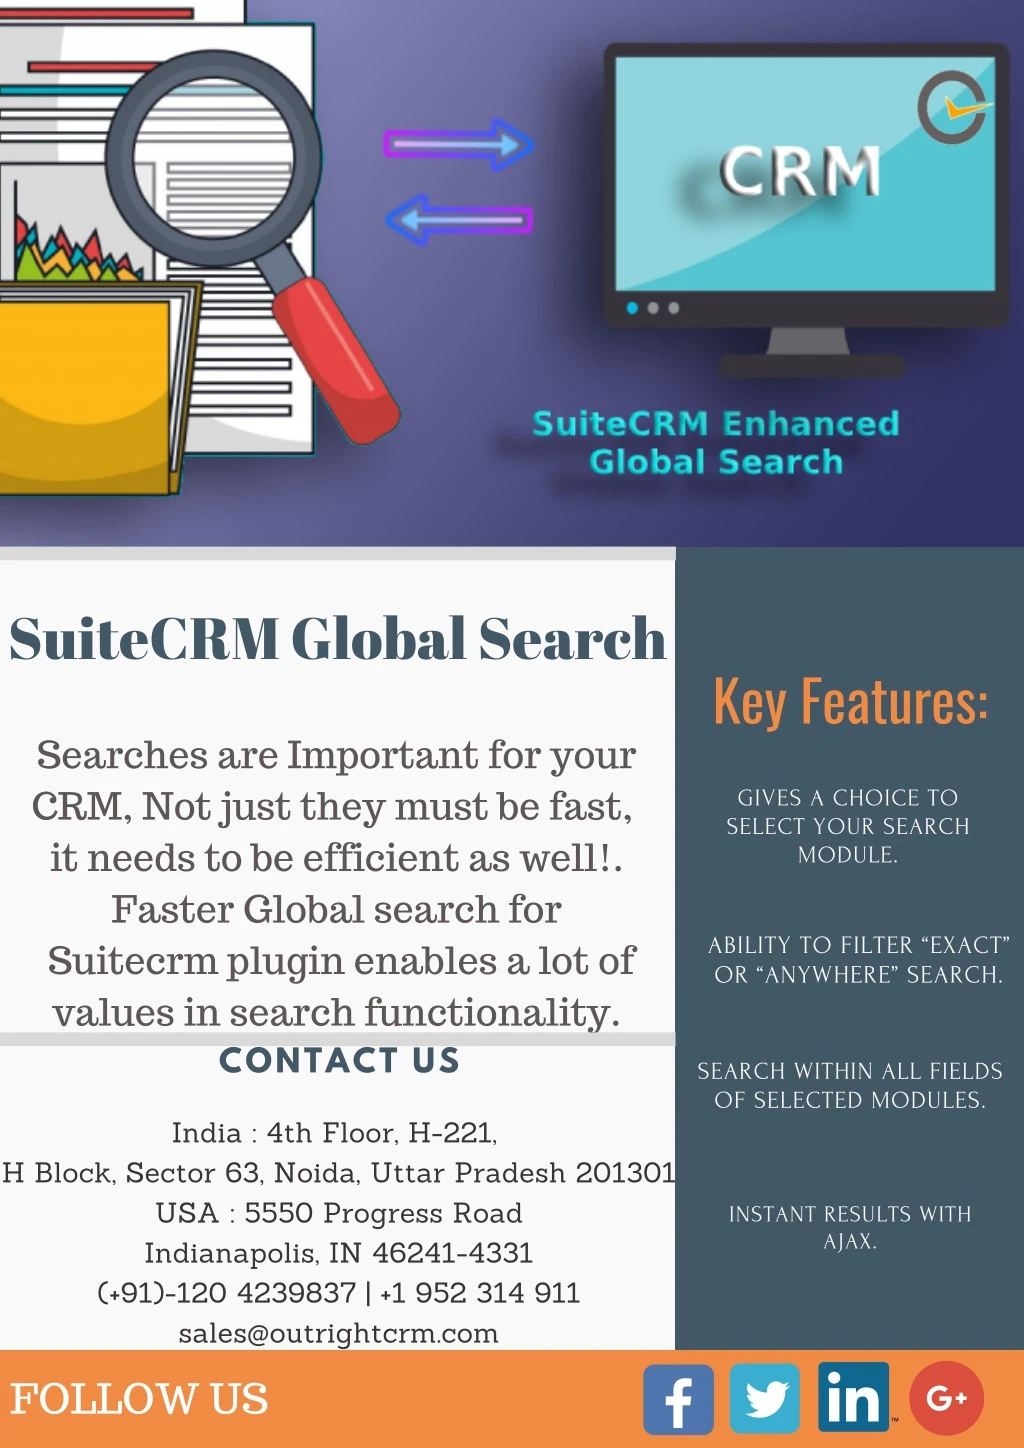 suitecrm global search